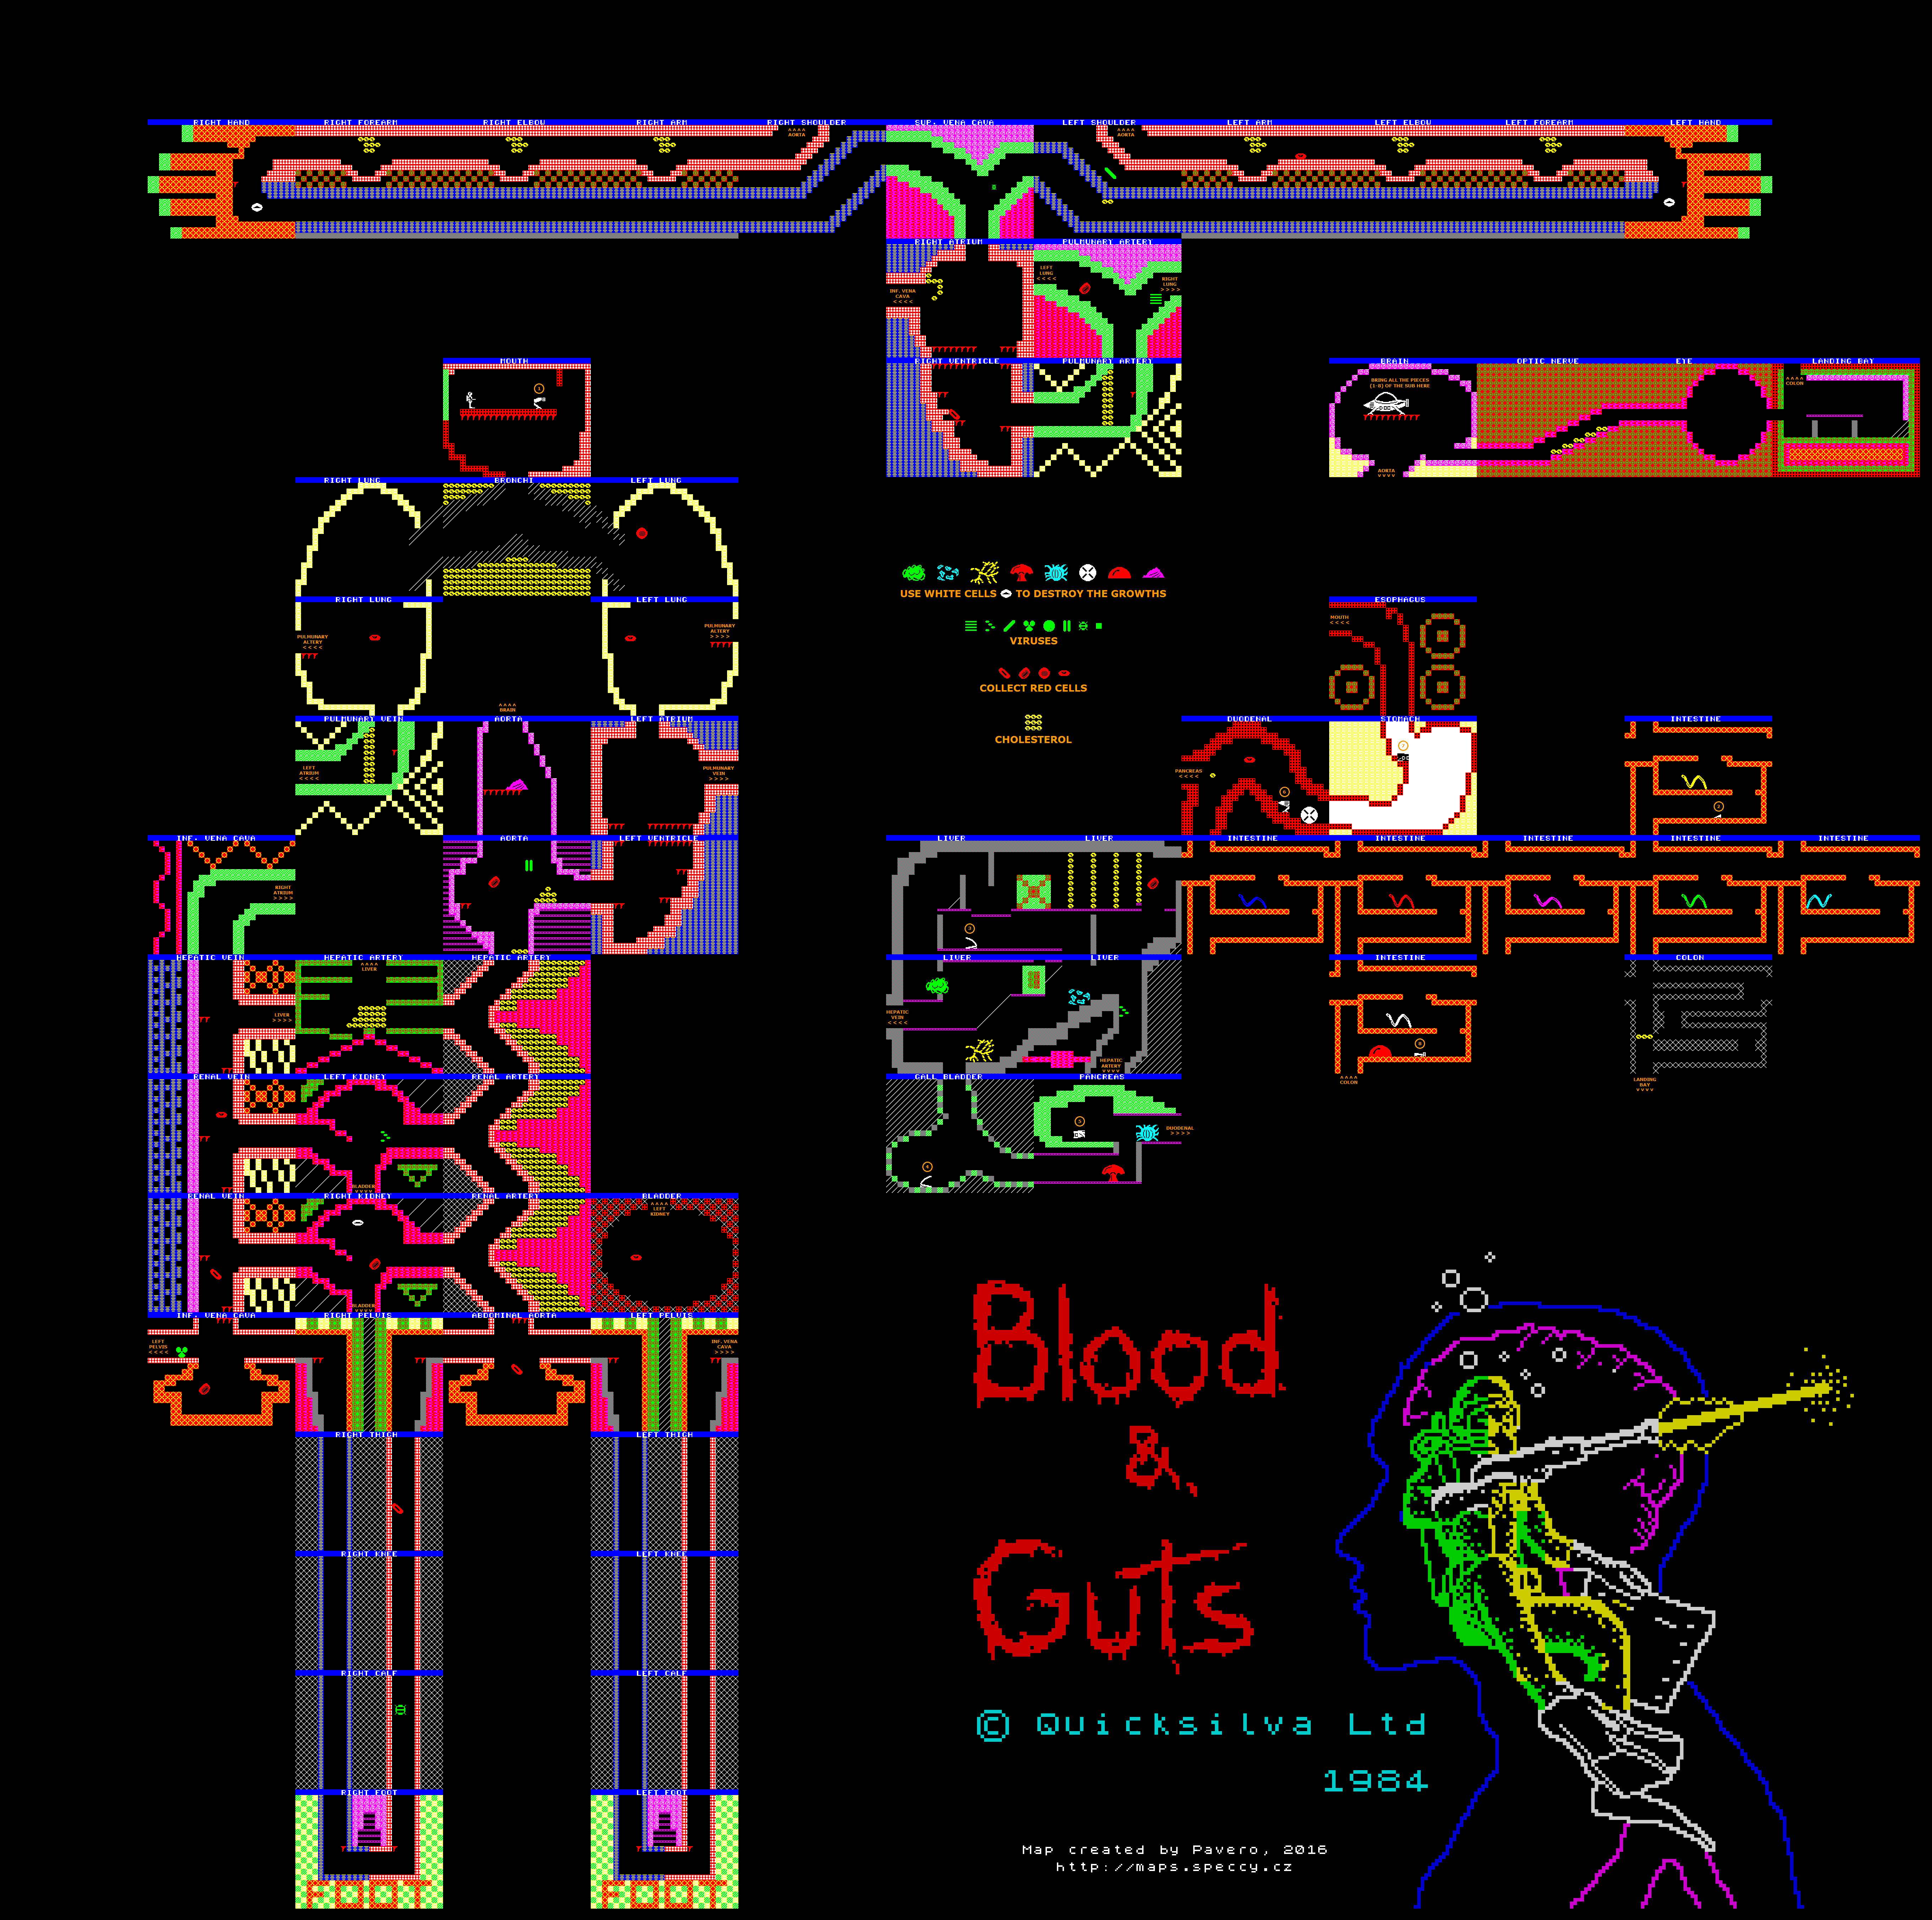 Blood 'n' Guts - The Map